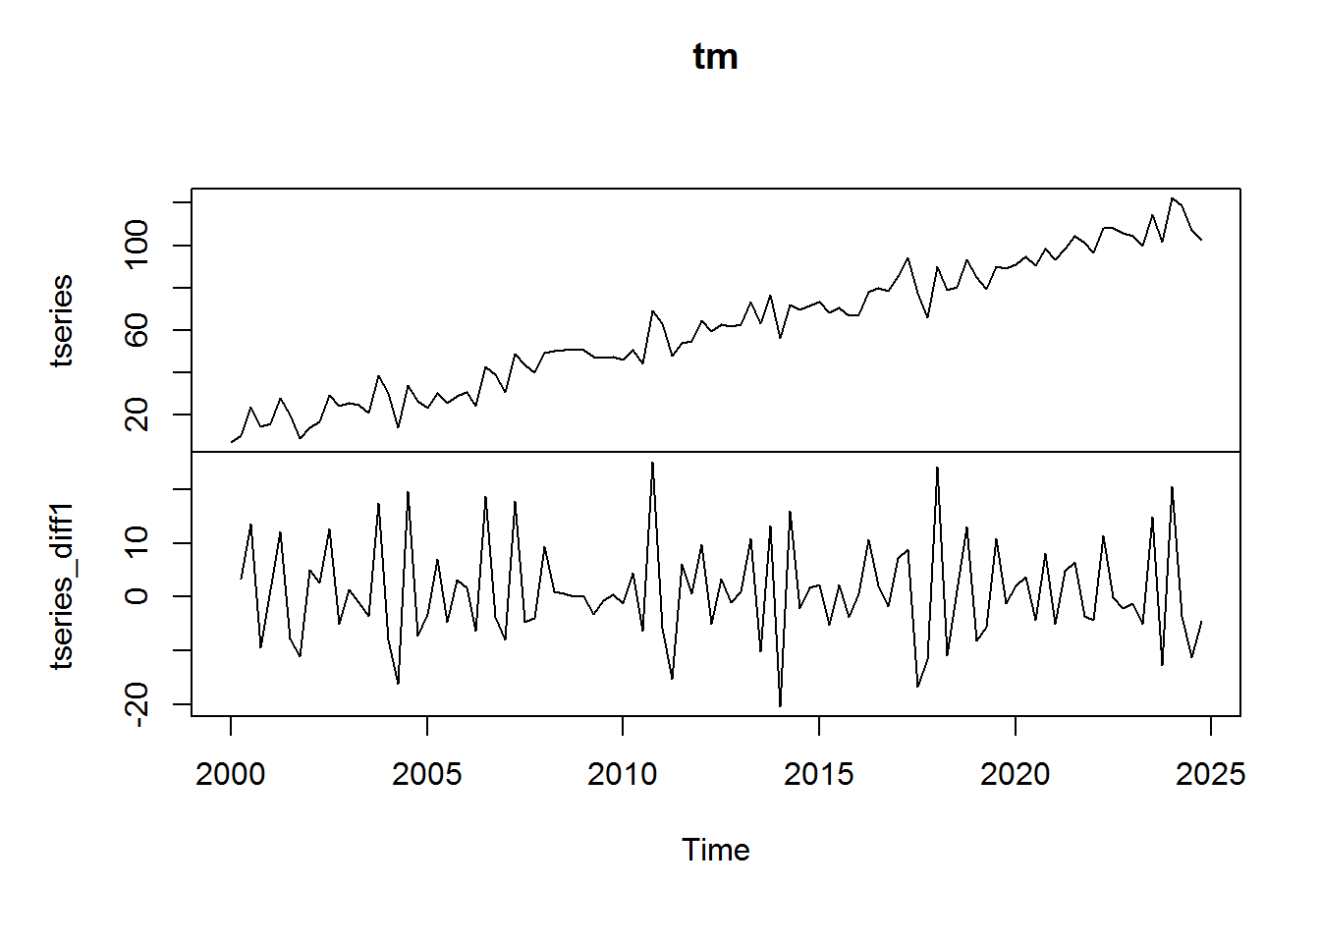 time series analysis literature review